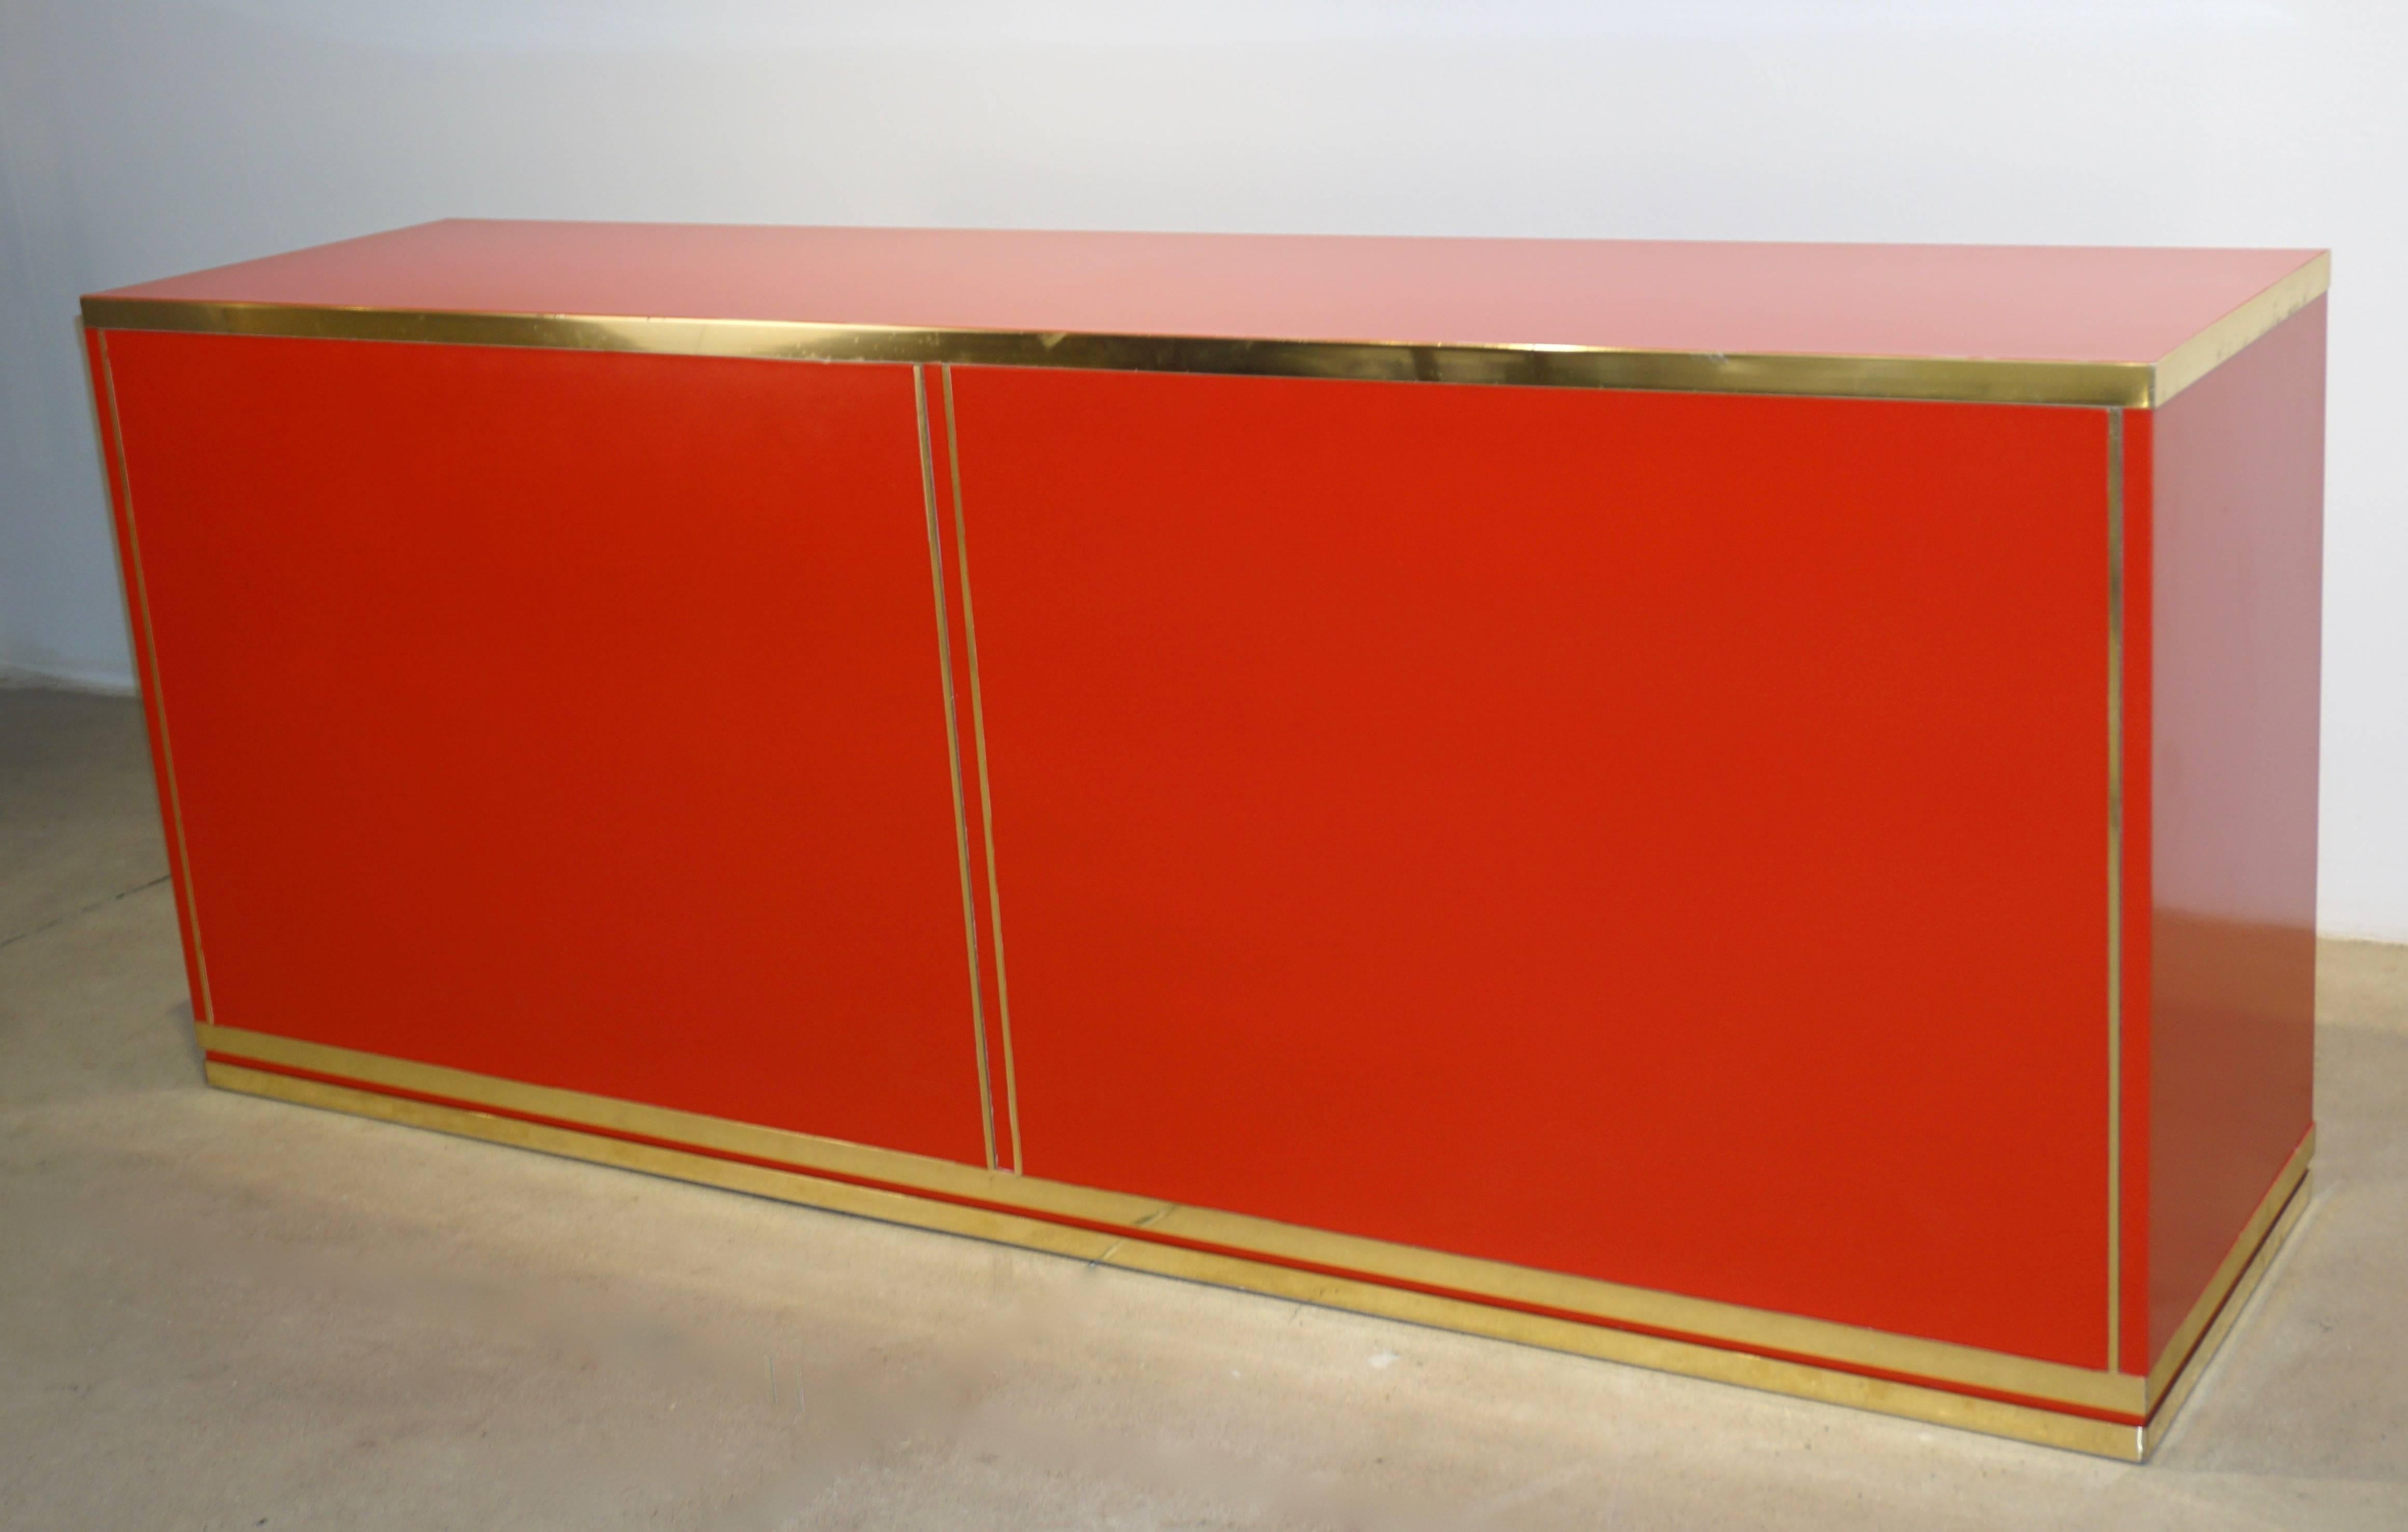 One-of-a-kind Italian vintage sideboard or cabinet by the Roman Company l'Angolo Metallarte, entirely handmade, China red lacquered wood surround with Minimalist decor of oriental inspiration highlighted by flat brass circles and edged on the four